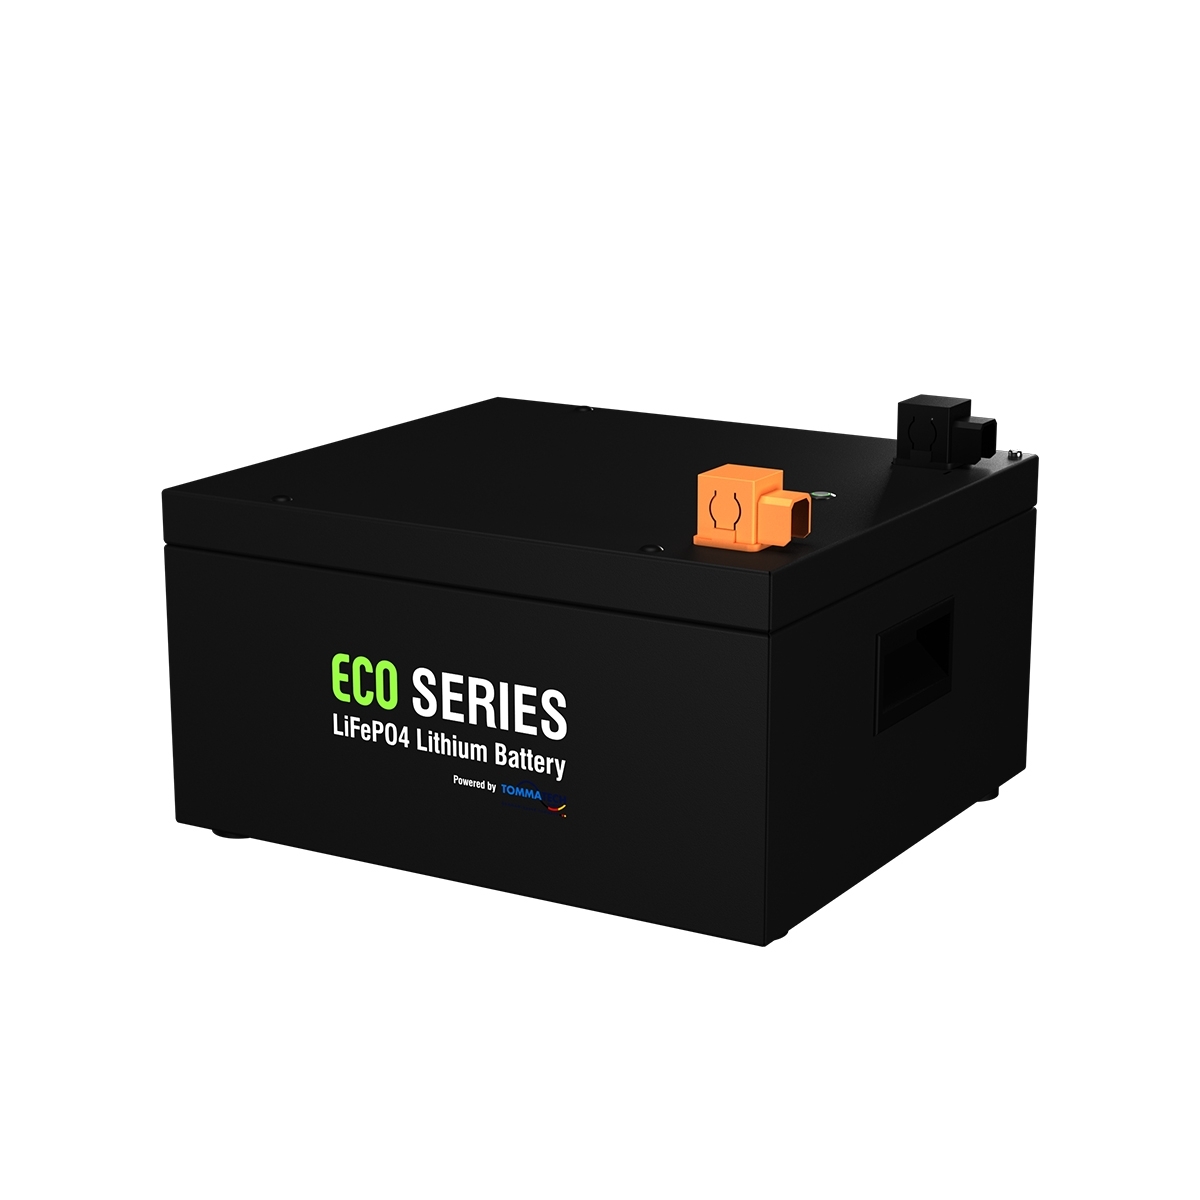 TommaTech ECO Series 25.6V 100Ah LFP Lithium Battery